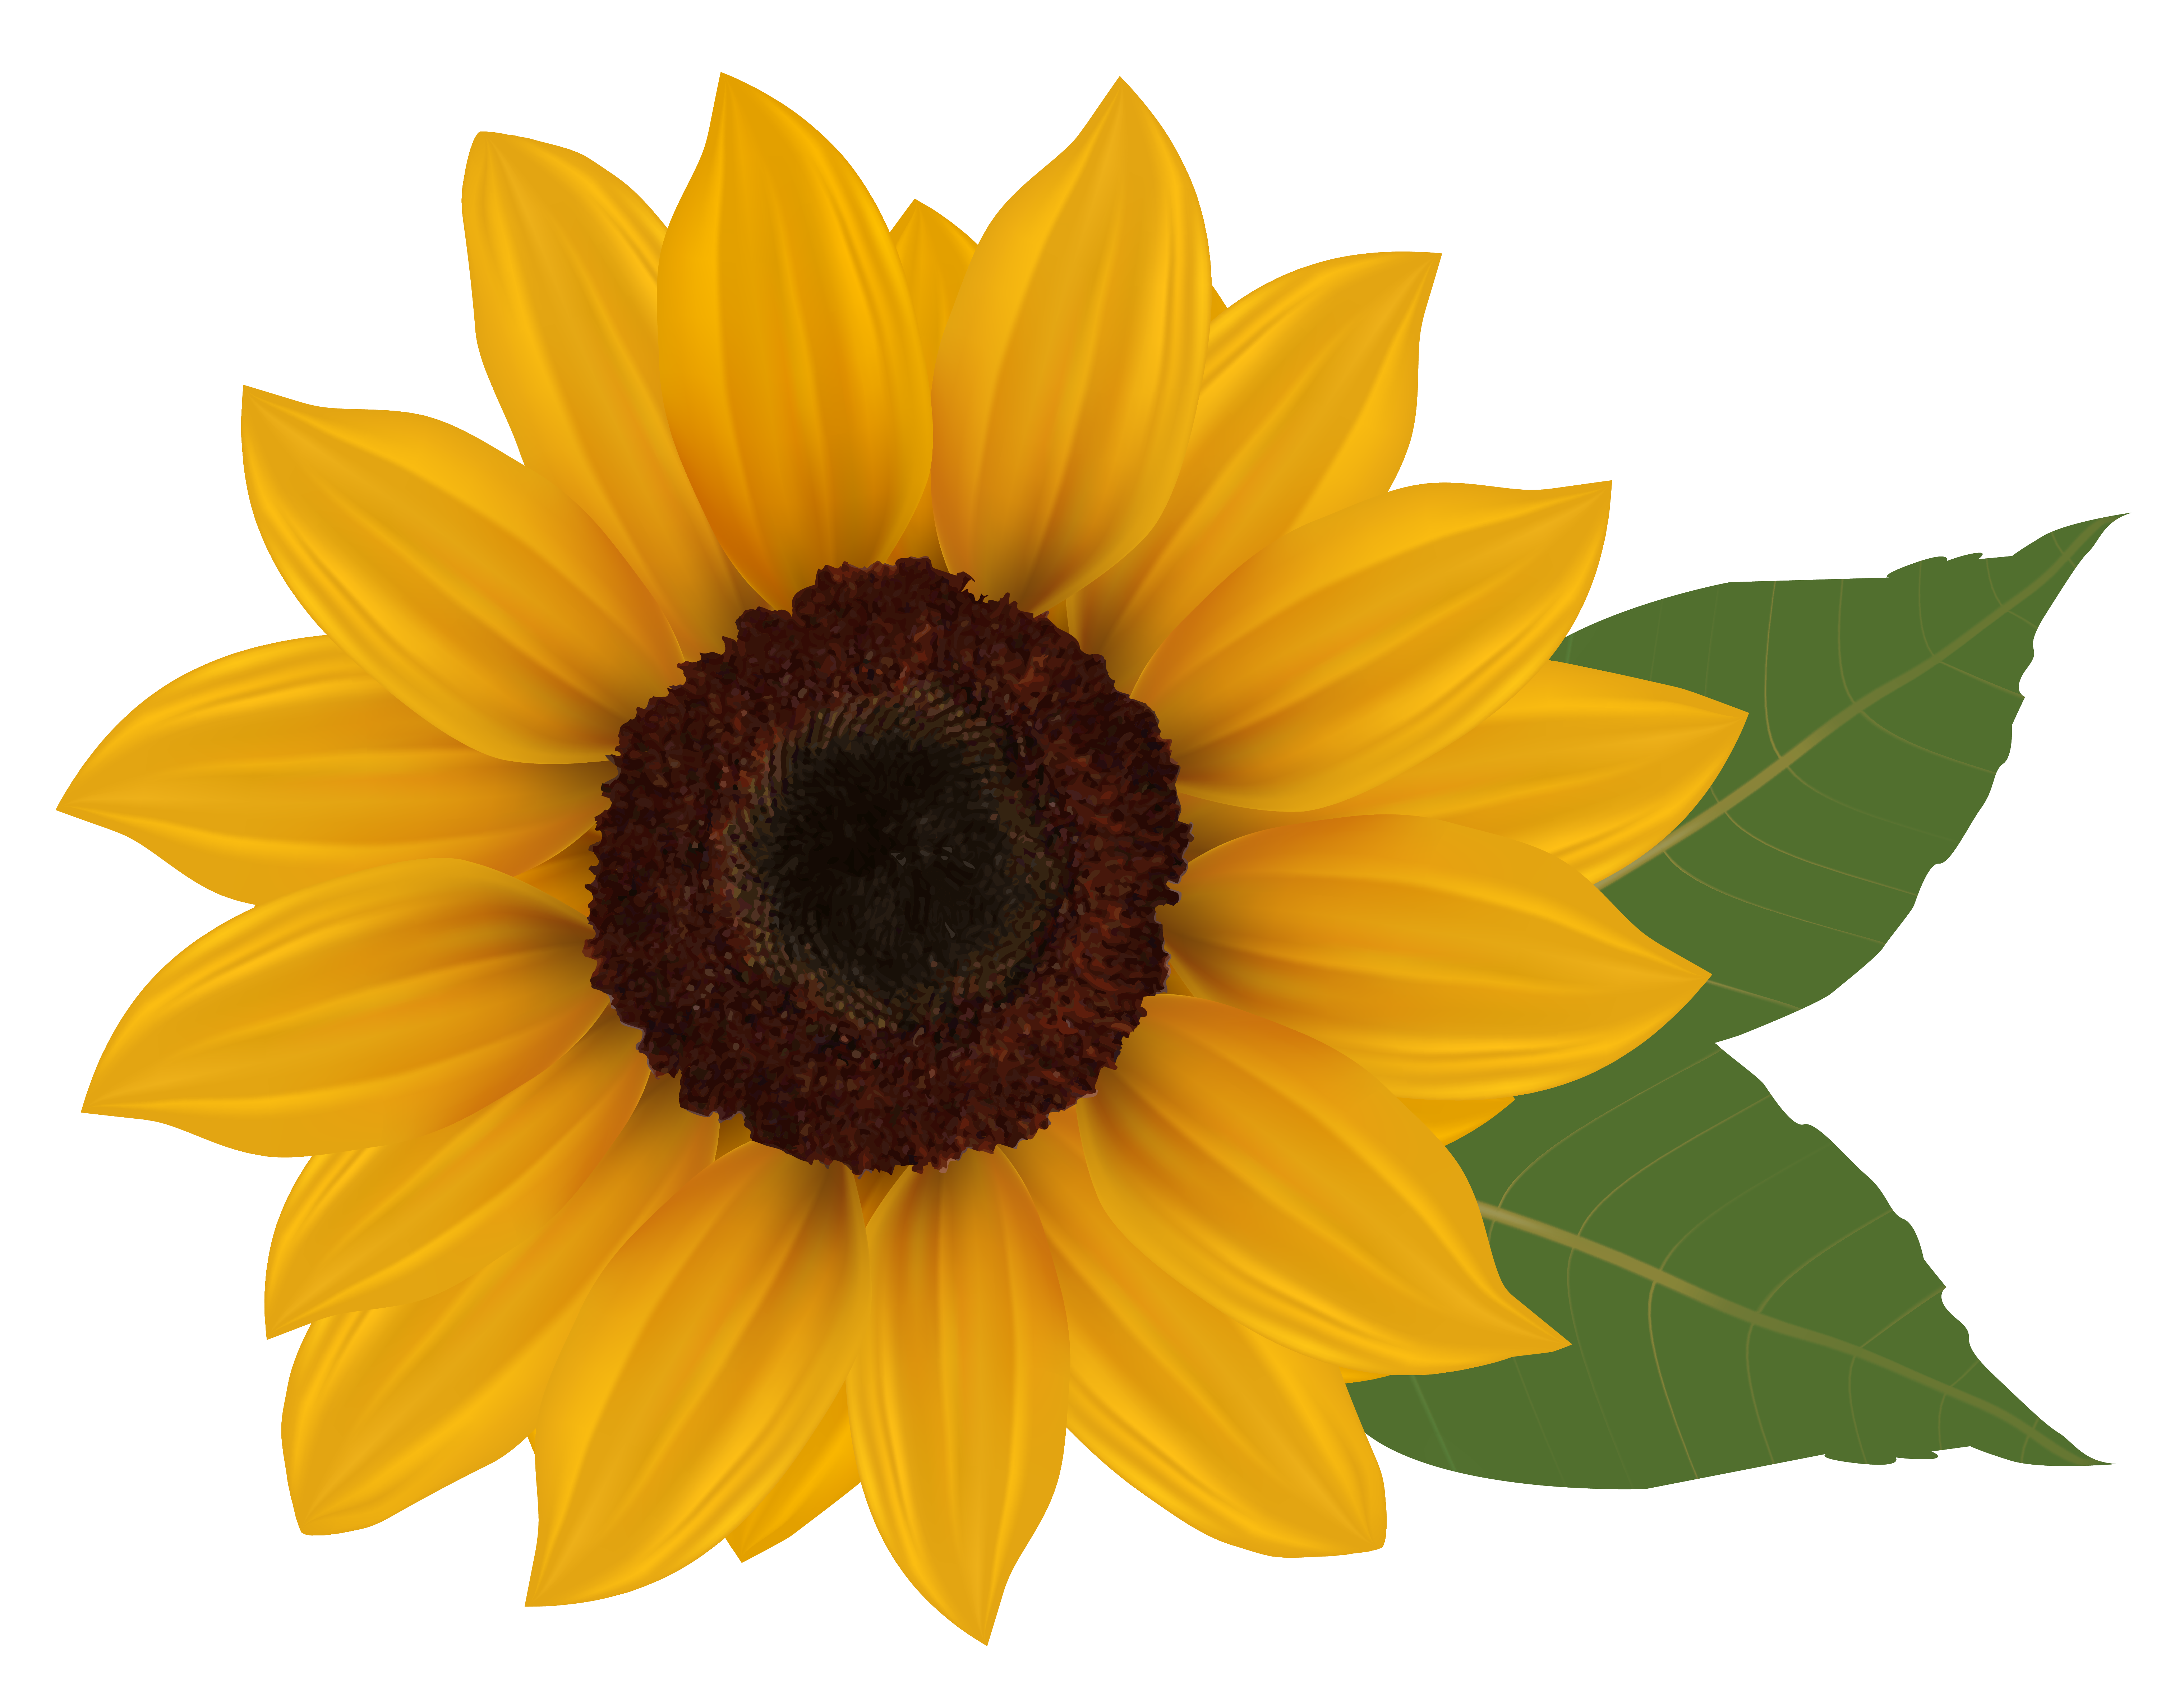 Sunflower PNG Clipart Picture | Gallery Yopriceville - High-Quality ...